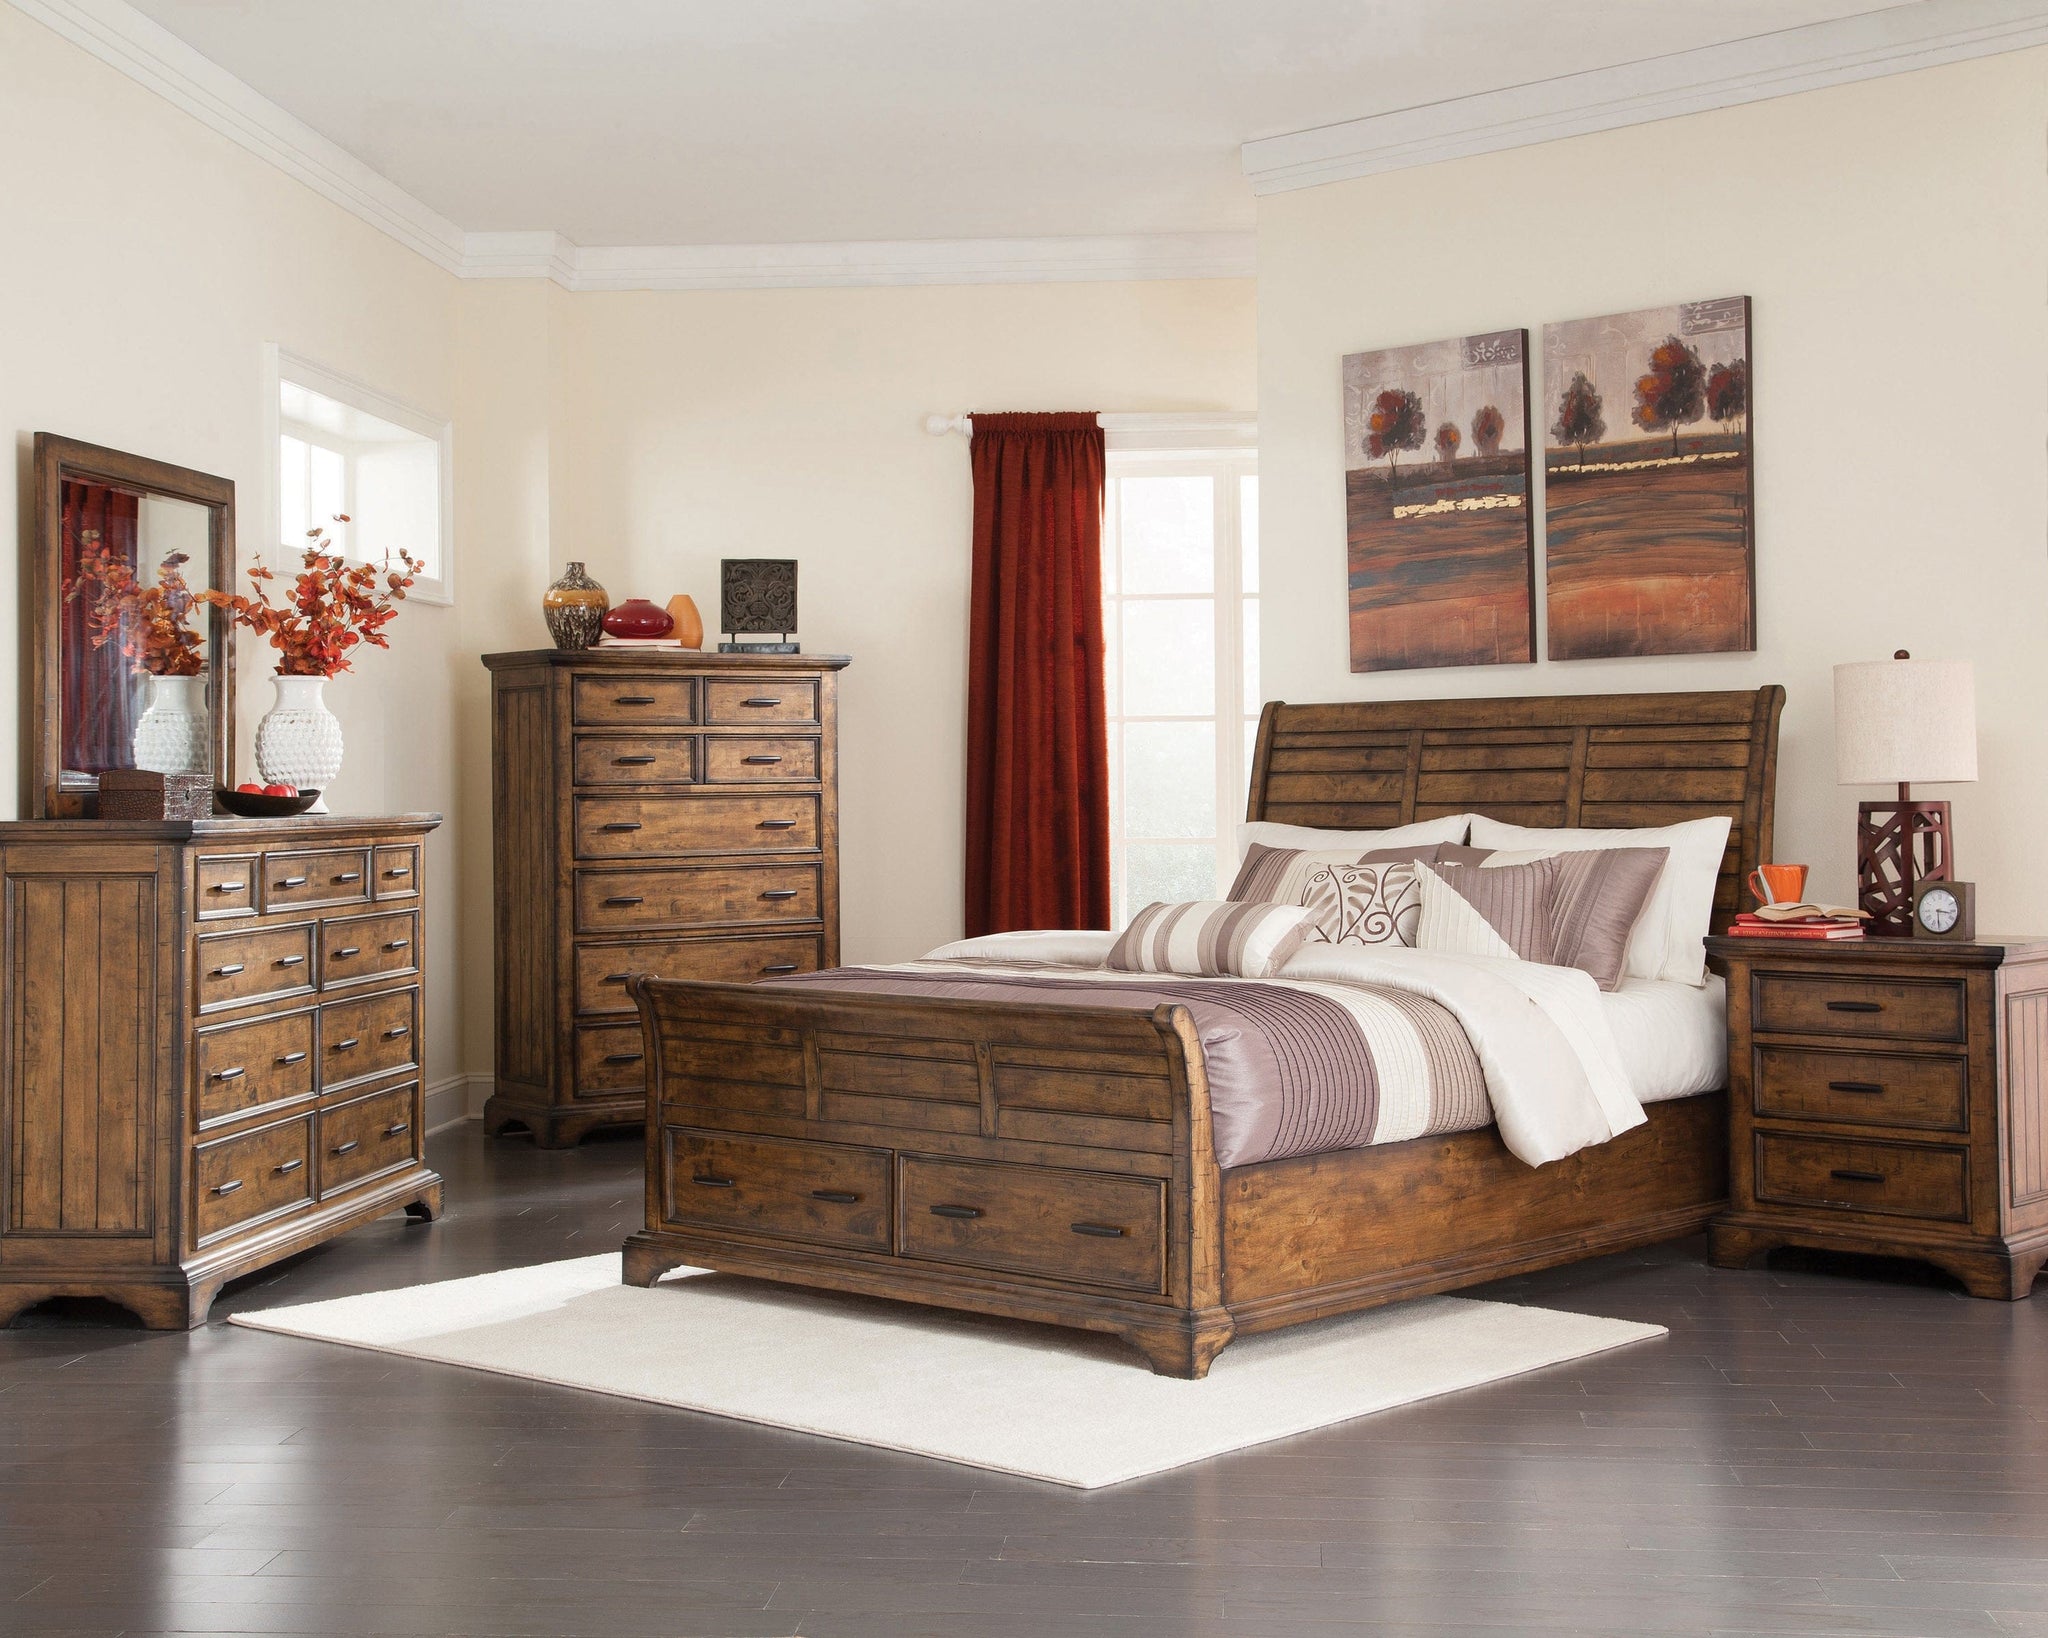 Elk Grove Eastern King Storage Bed Vintage Bourbon Collection: Make Any Room Stand Out With This Dynamic Storage Bed. Crafty Design Elements On A Vintage Bourbon Finish All Solid Wood Construction Frame Makes It A Sophisticated Choice.   SKU: 203891KE